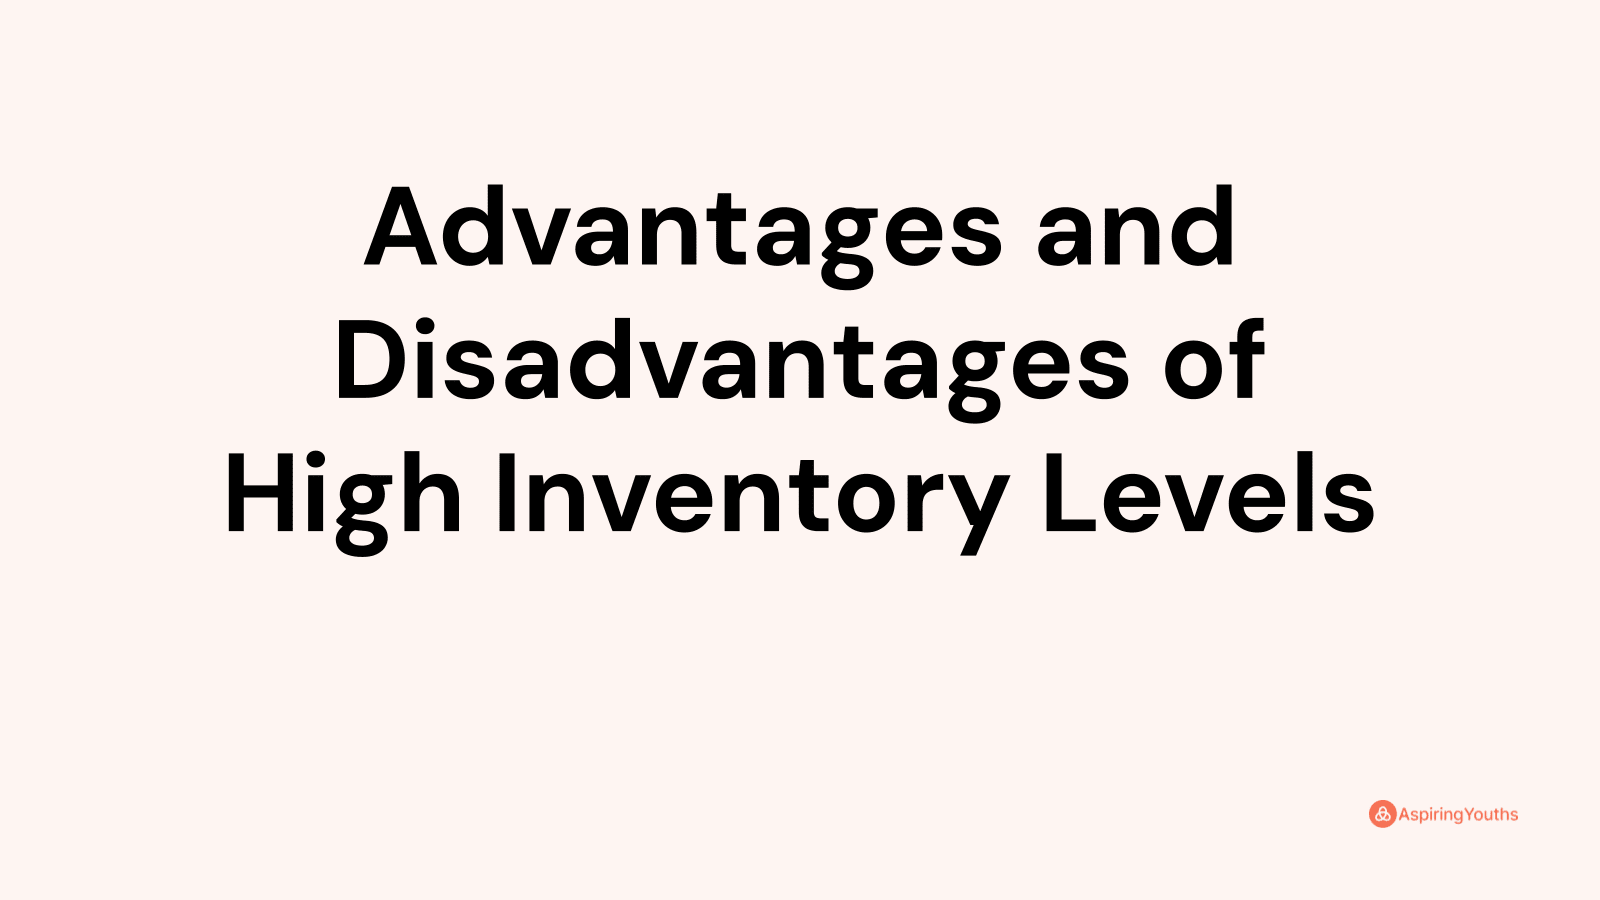 Advantages and Disadvantages of High Inventory Levels